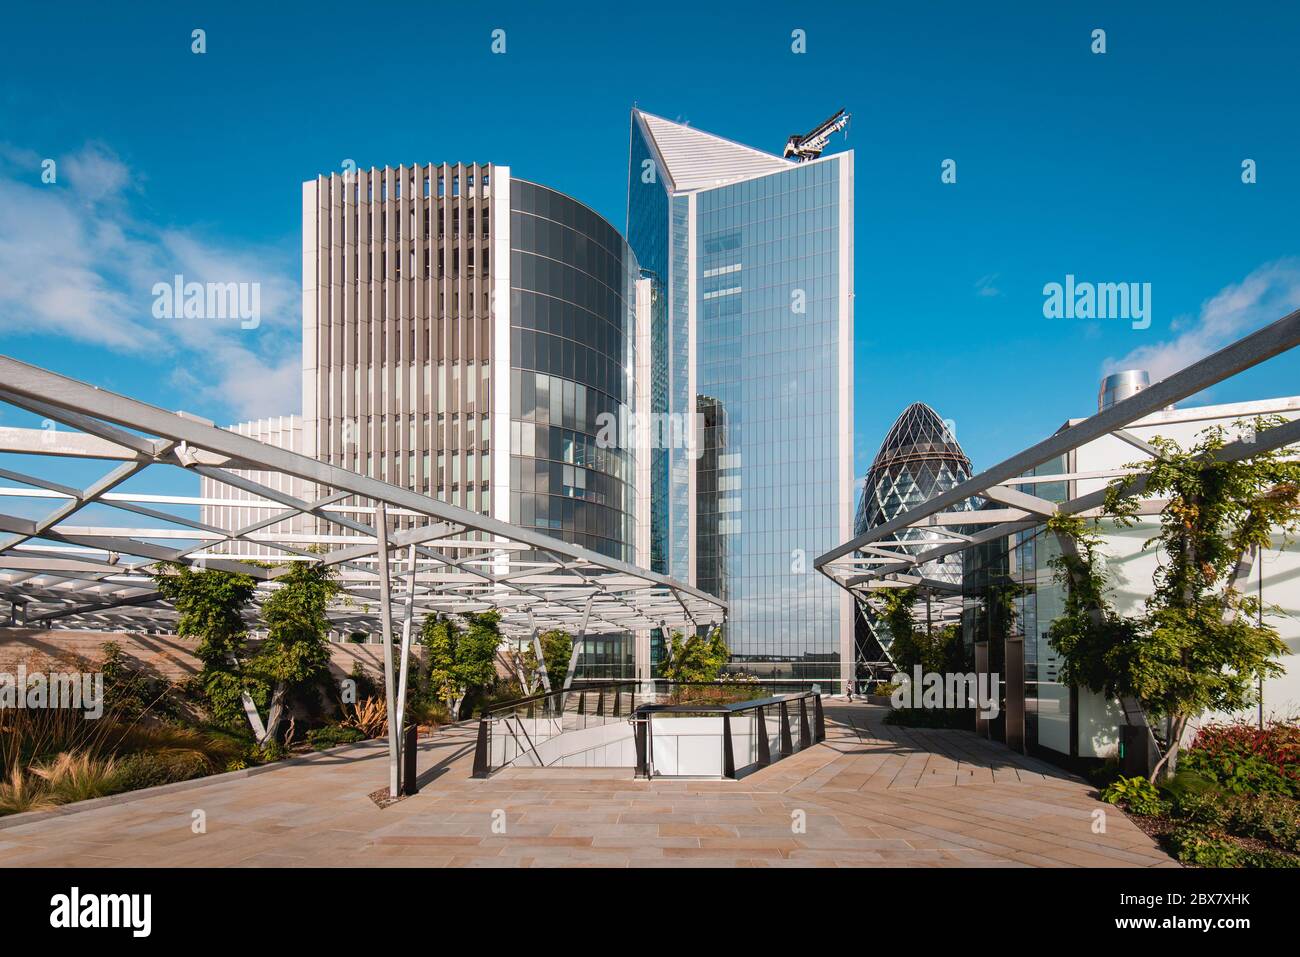 The Garden on the Top of Fen Court Building in London, UK Stock Photo